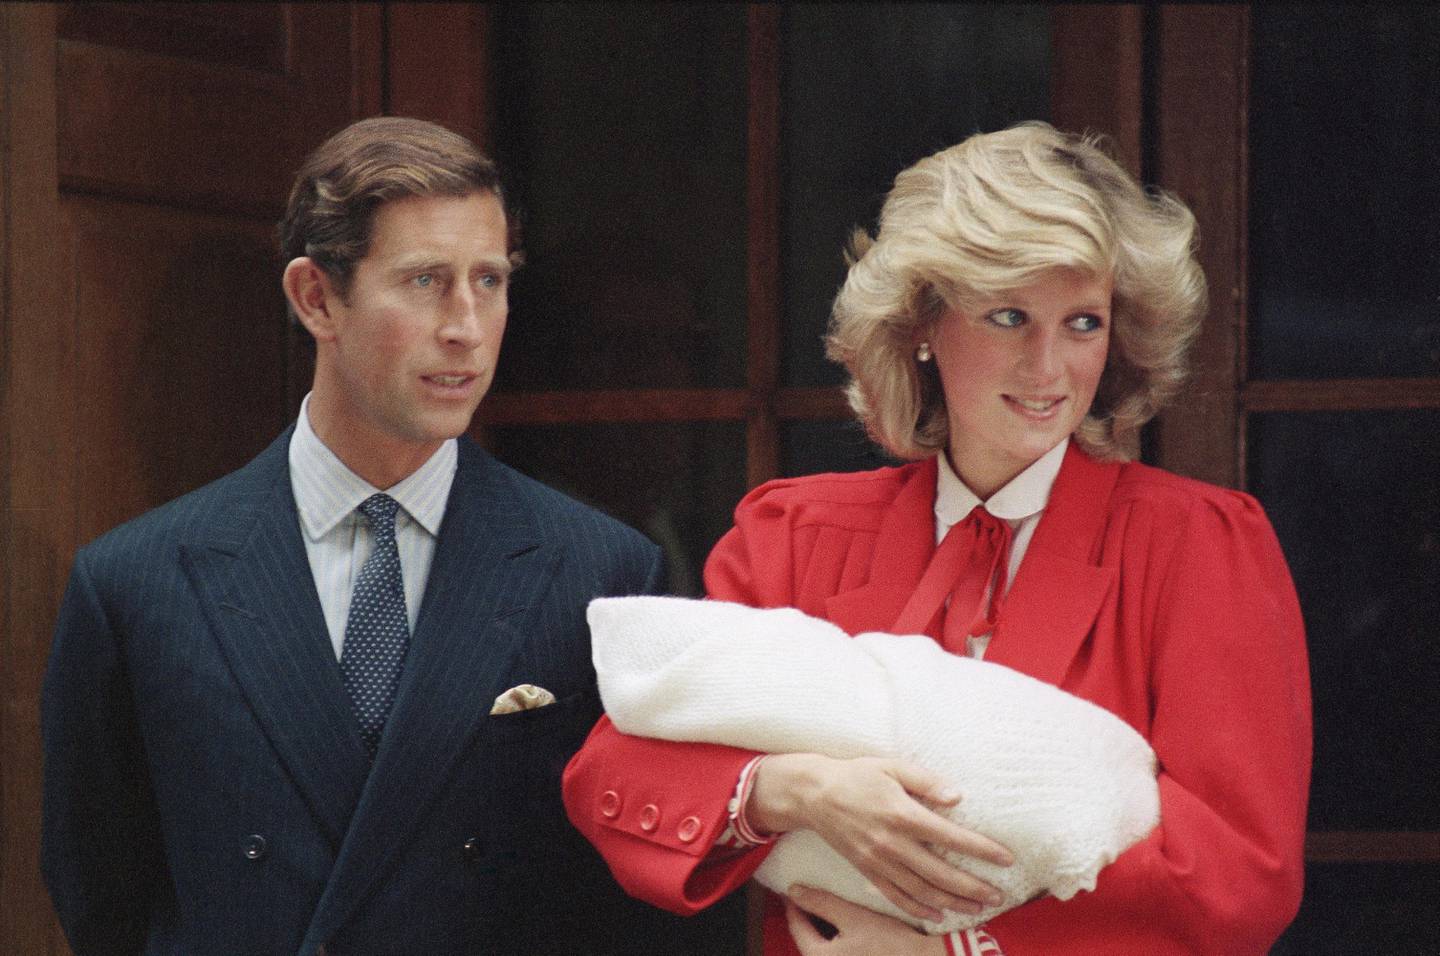 FILE - In this Sept. 16, 1984 file photo, Britain's Prince Charles and Princess Diana, leave St. Mary's Hospital in Paddington, London, with their new baby son. Princess Diana carries new baby, Prince Harry who was born on Sept. 15. It has been 20 years since the death of Princess Diana in a car crash in Paris and the outpouring of grief that followed the death of the ÄúpeopleÄôs princess.Äù (AP Photo, File)